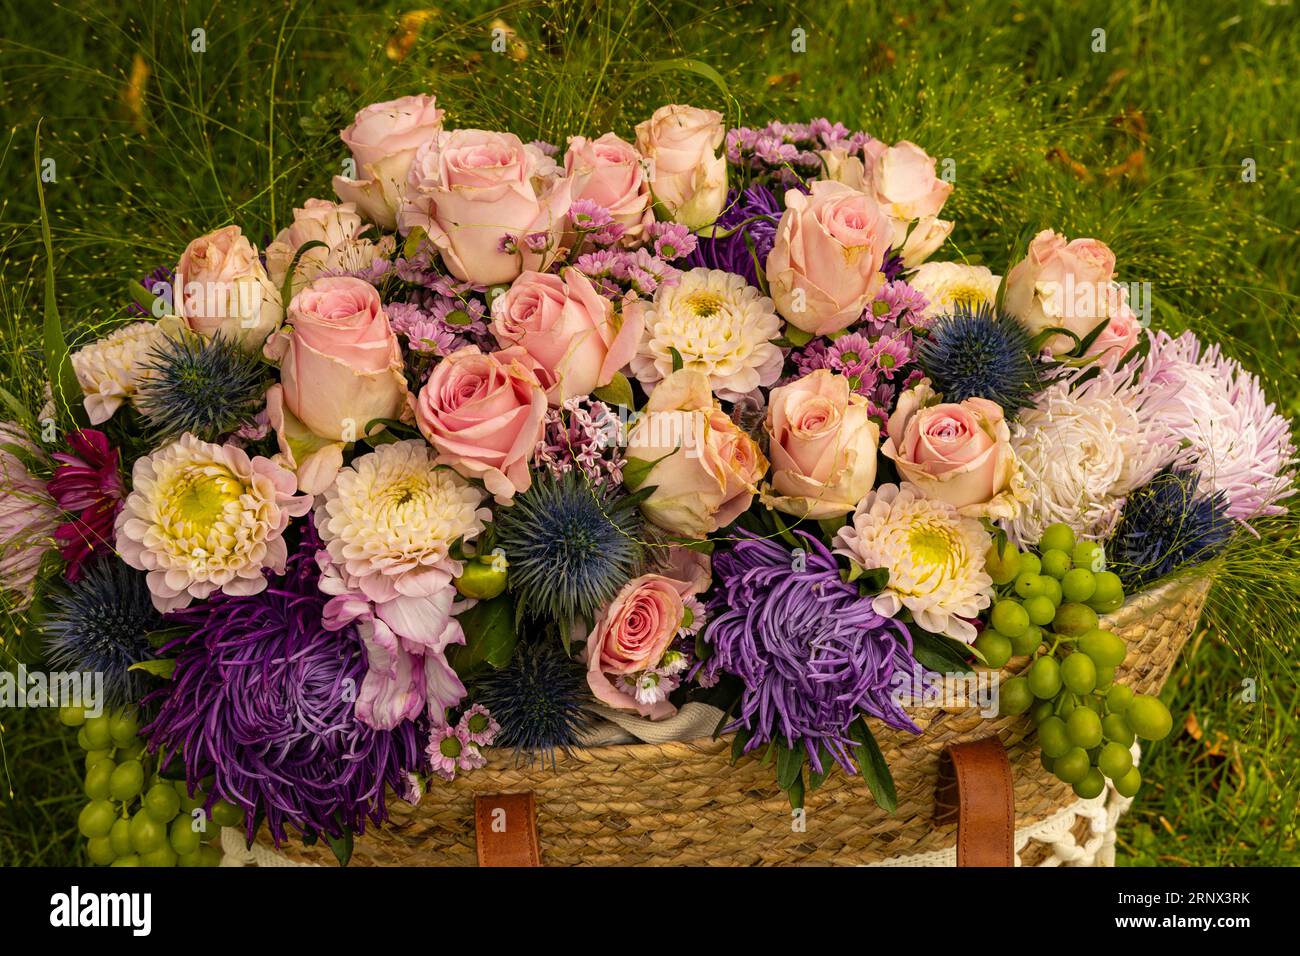 beautiful colorful flower bouquet with roses an other blooms Stock Photo